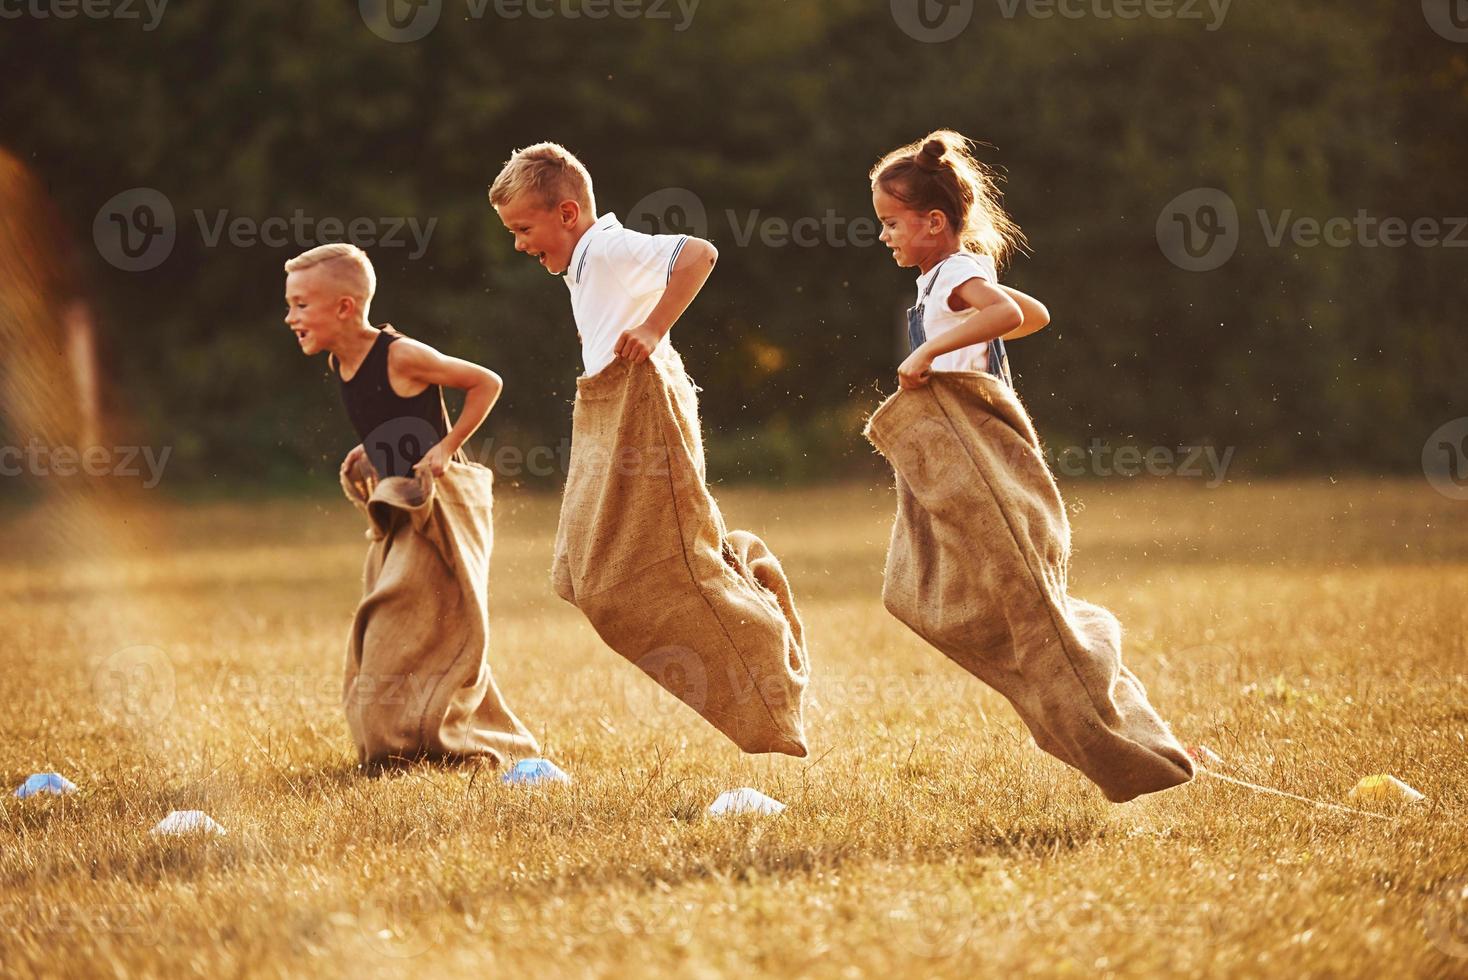 Jumping sack race outdoors in the field. Kids have fun at sunny daytime photo